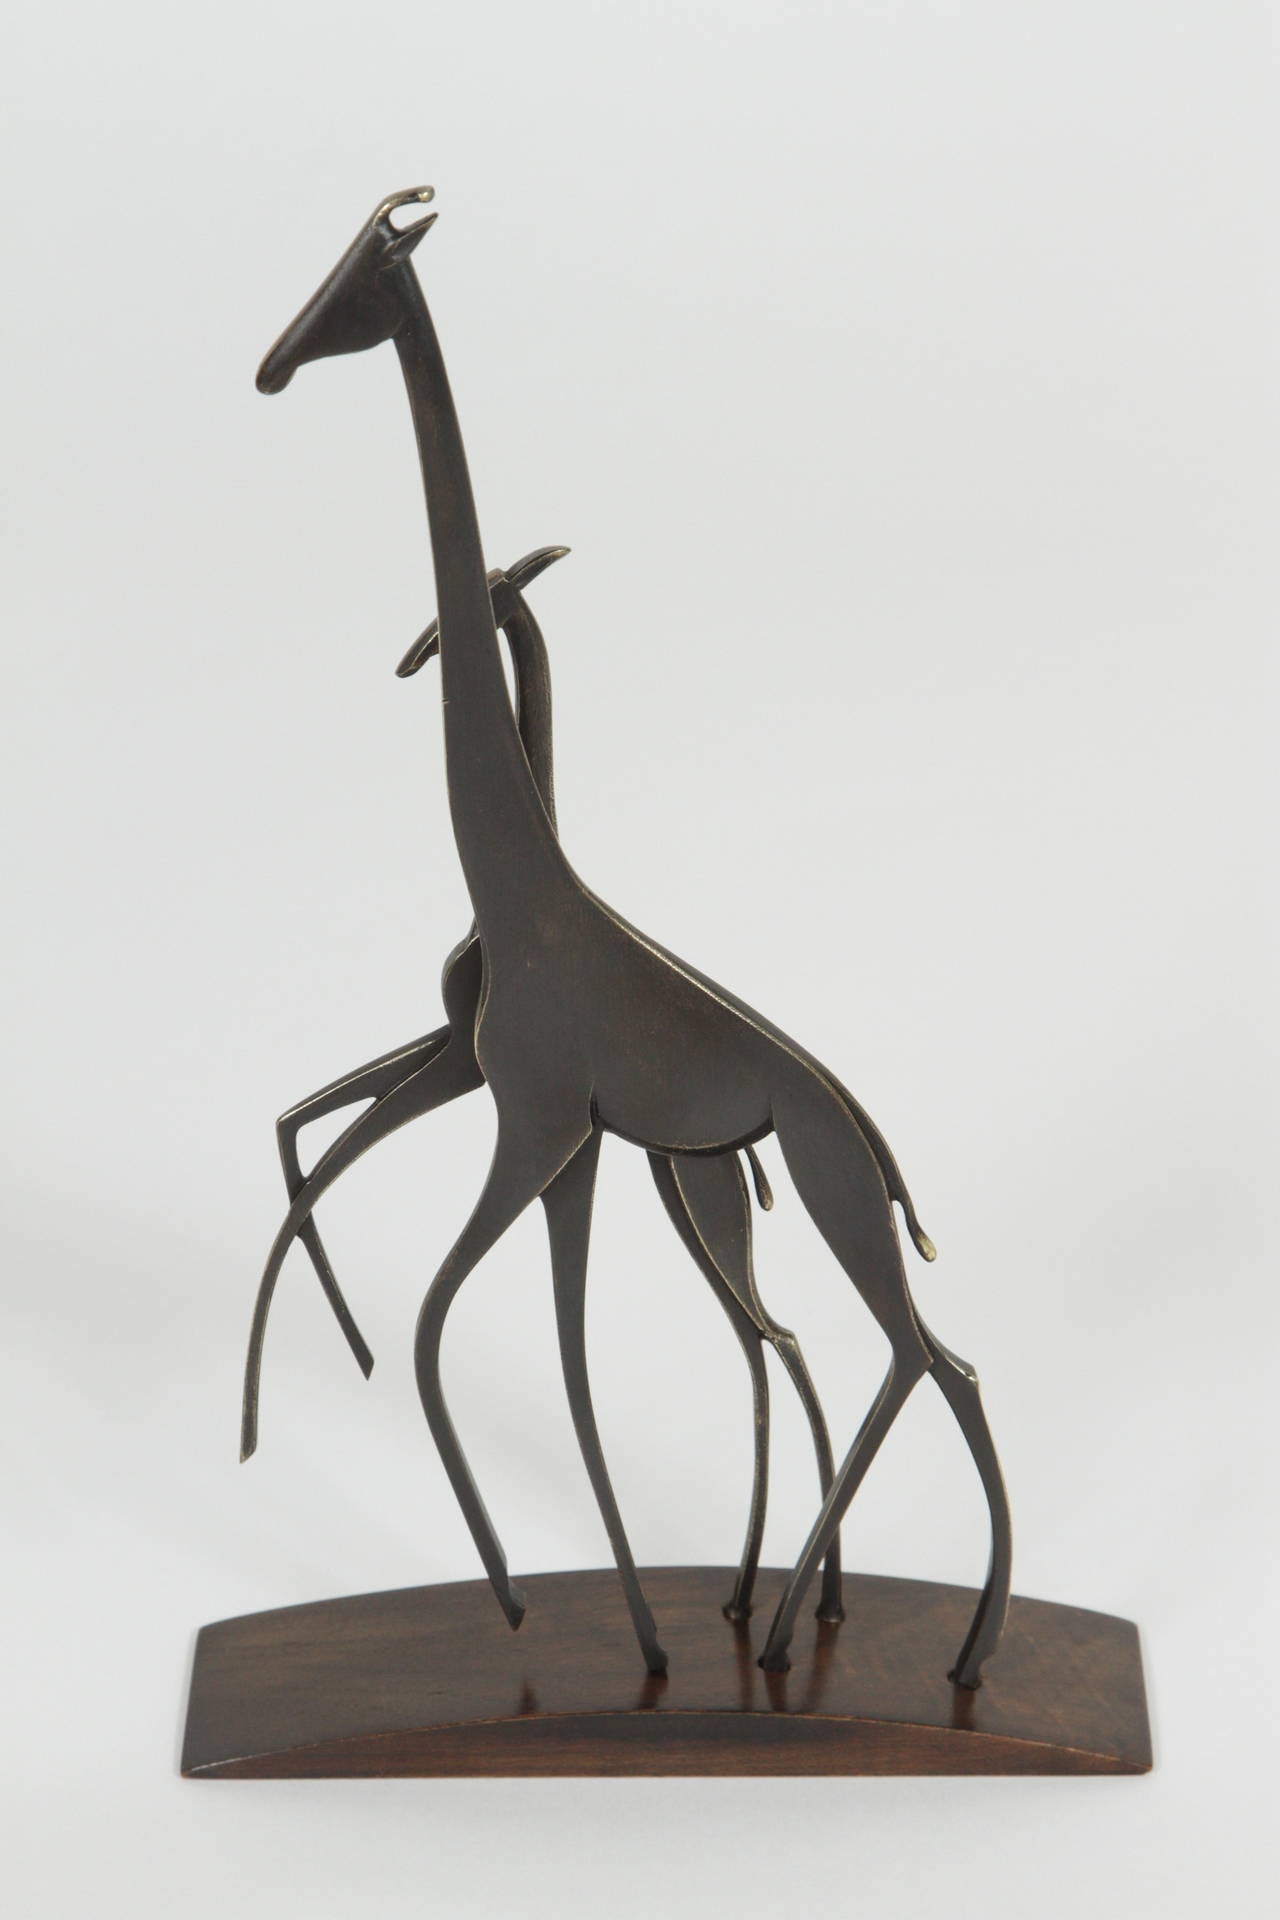 Lovely example of a stylized realization of Europe's fascination with exotic animals, by Franz Hagenauer (1906 - 1986), a sculptor and artisan from Vienna.  Sculpture is an elegant rendition of a mother giraffe with her young, composed of richly